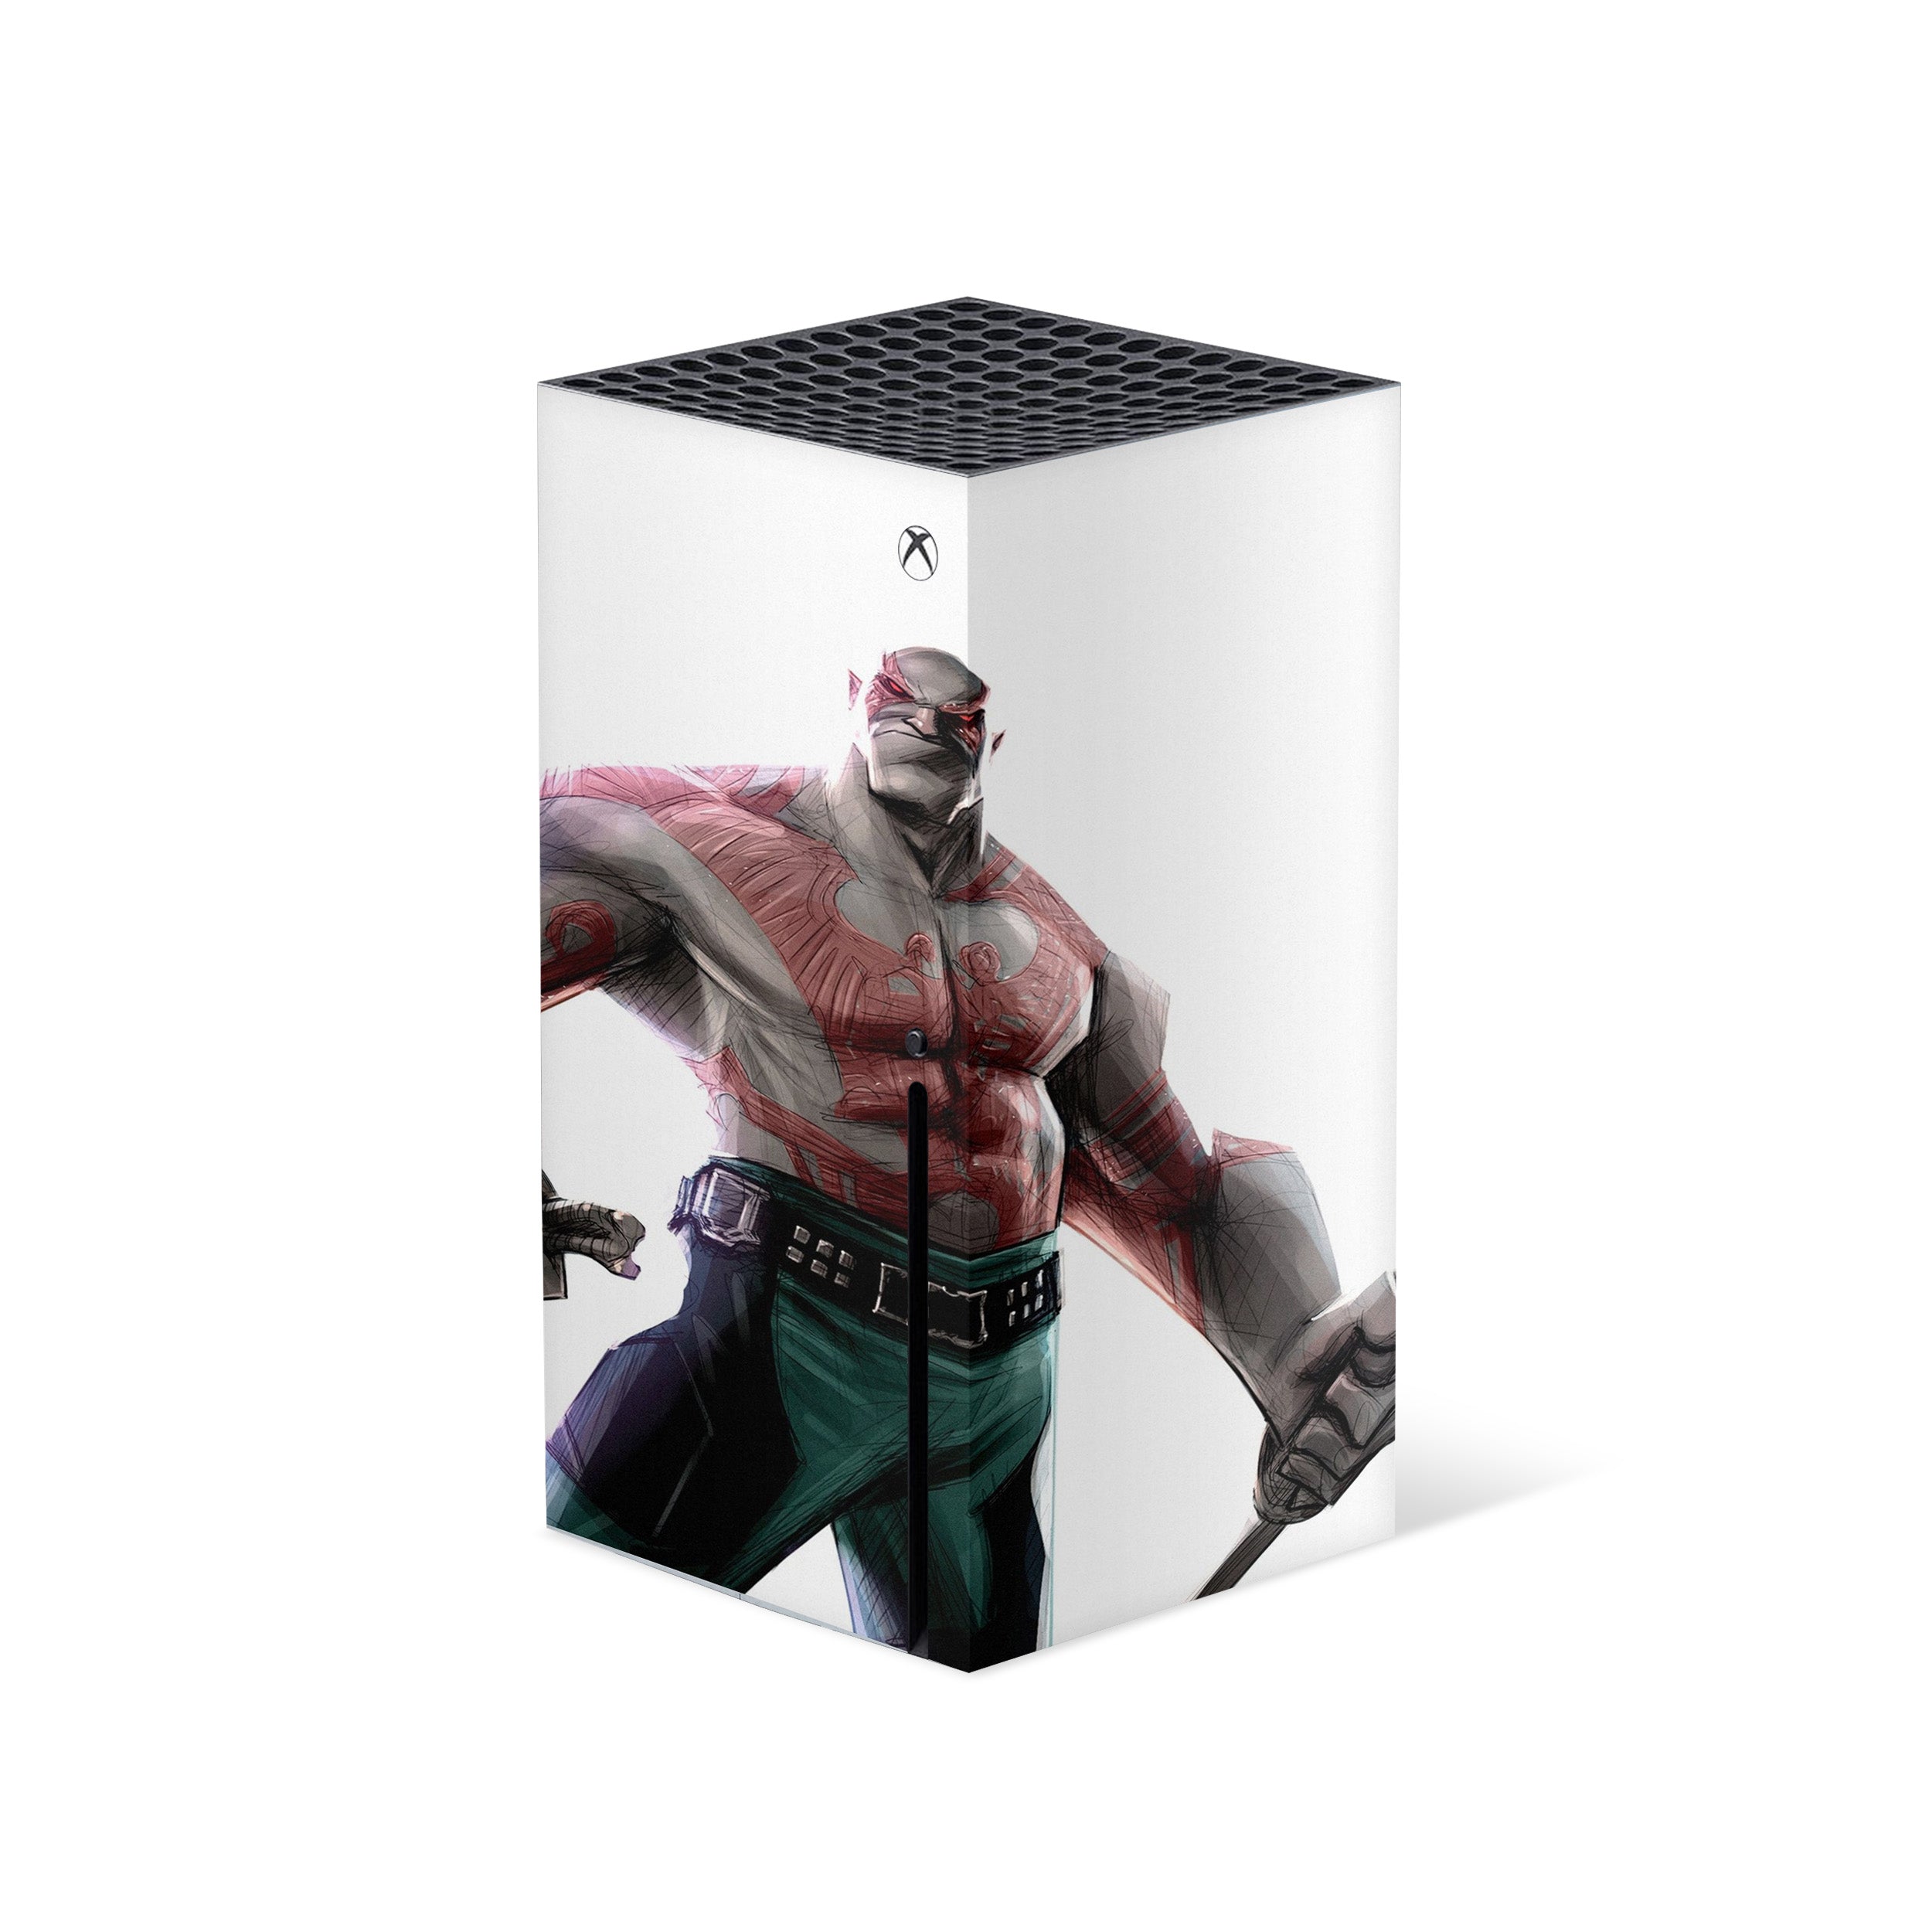 A video game skin featuring a Marvel Guardians of the Galaxy Drax design for the Xbox Series X.